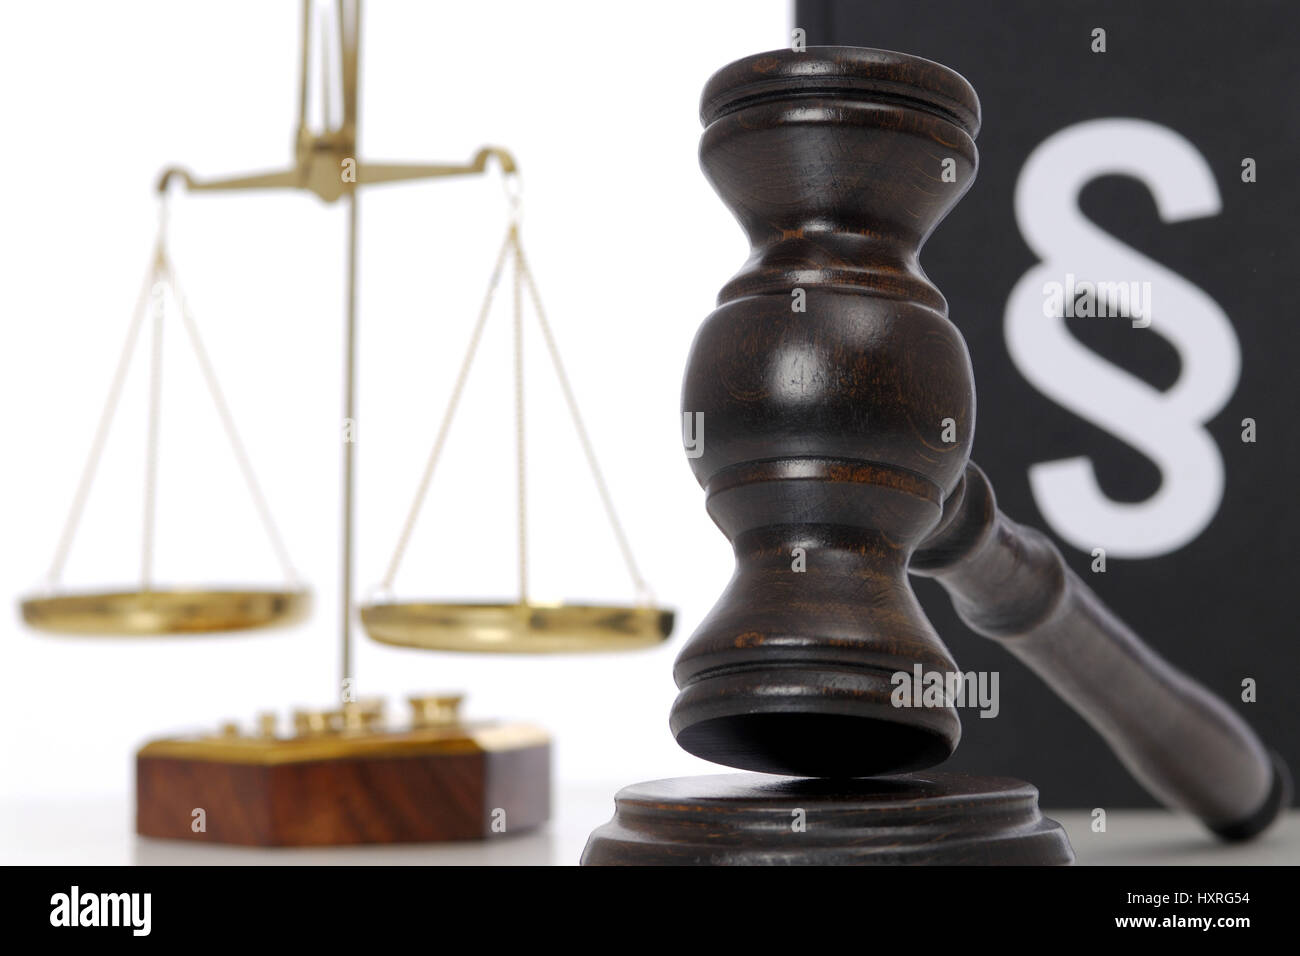 Law, laws, legislation, justice, justice, judgment, judgments, judicial system, judge, court, courts, section, section, judge's hammer, scales, law bo Stock Photo